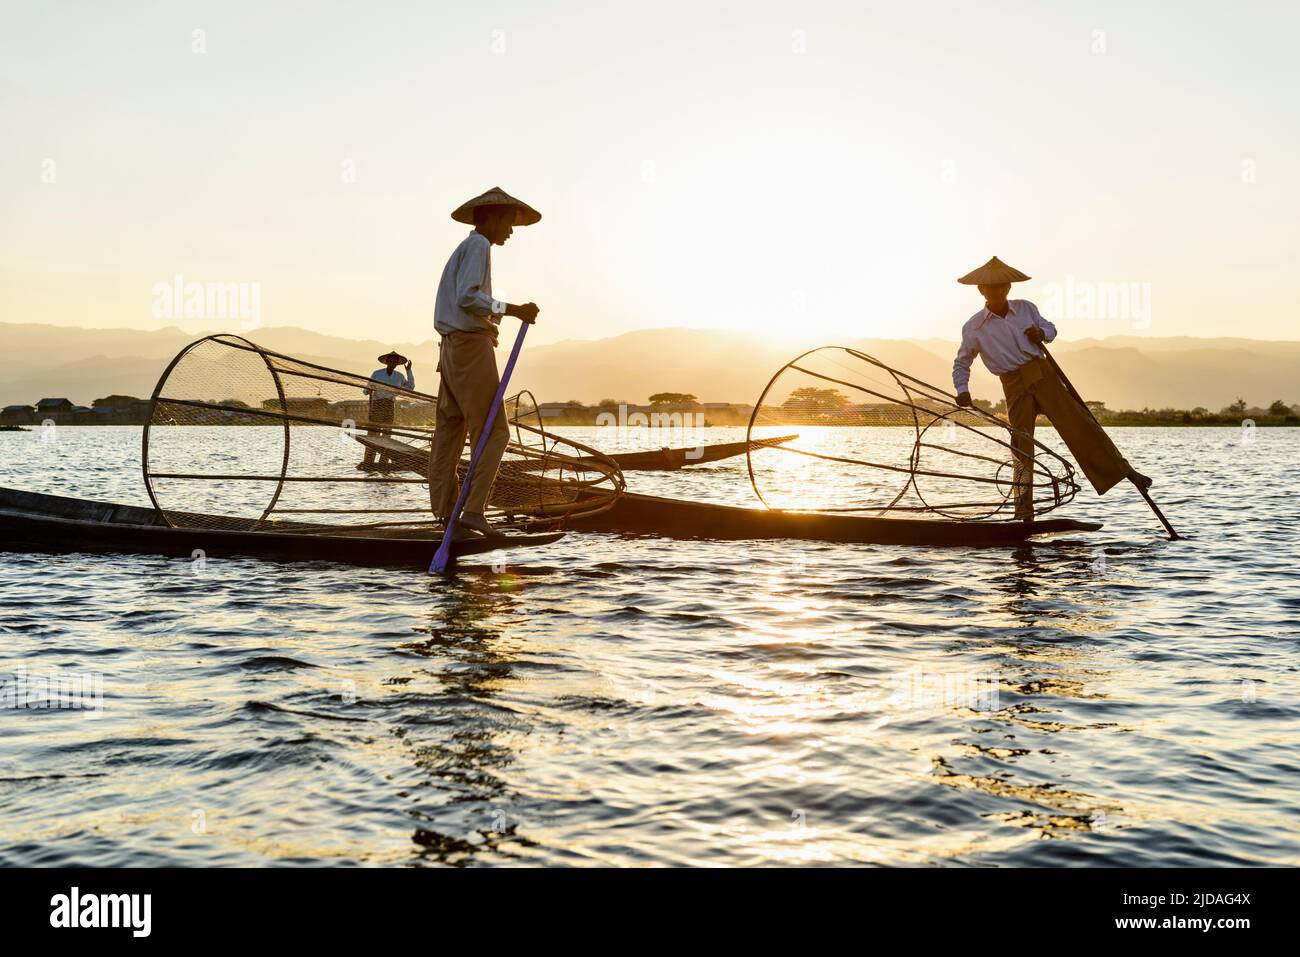 Three fisherman on Inle Lake, standing and using traditional rowing techniques, wrapping a leg around the oar. Stock Photo